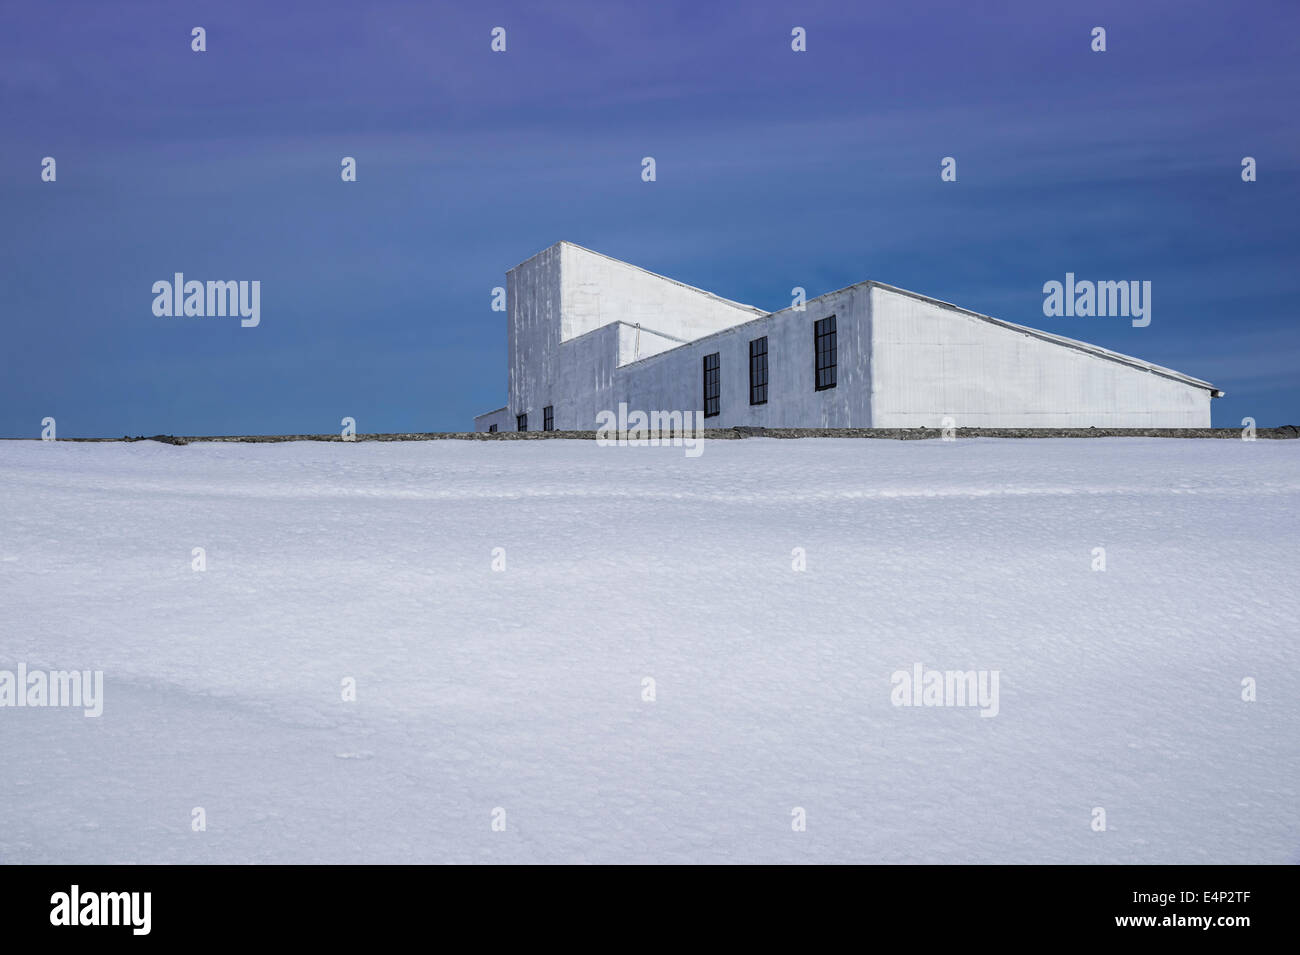 Snow Covered Roof With White Building Stock Photo